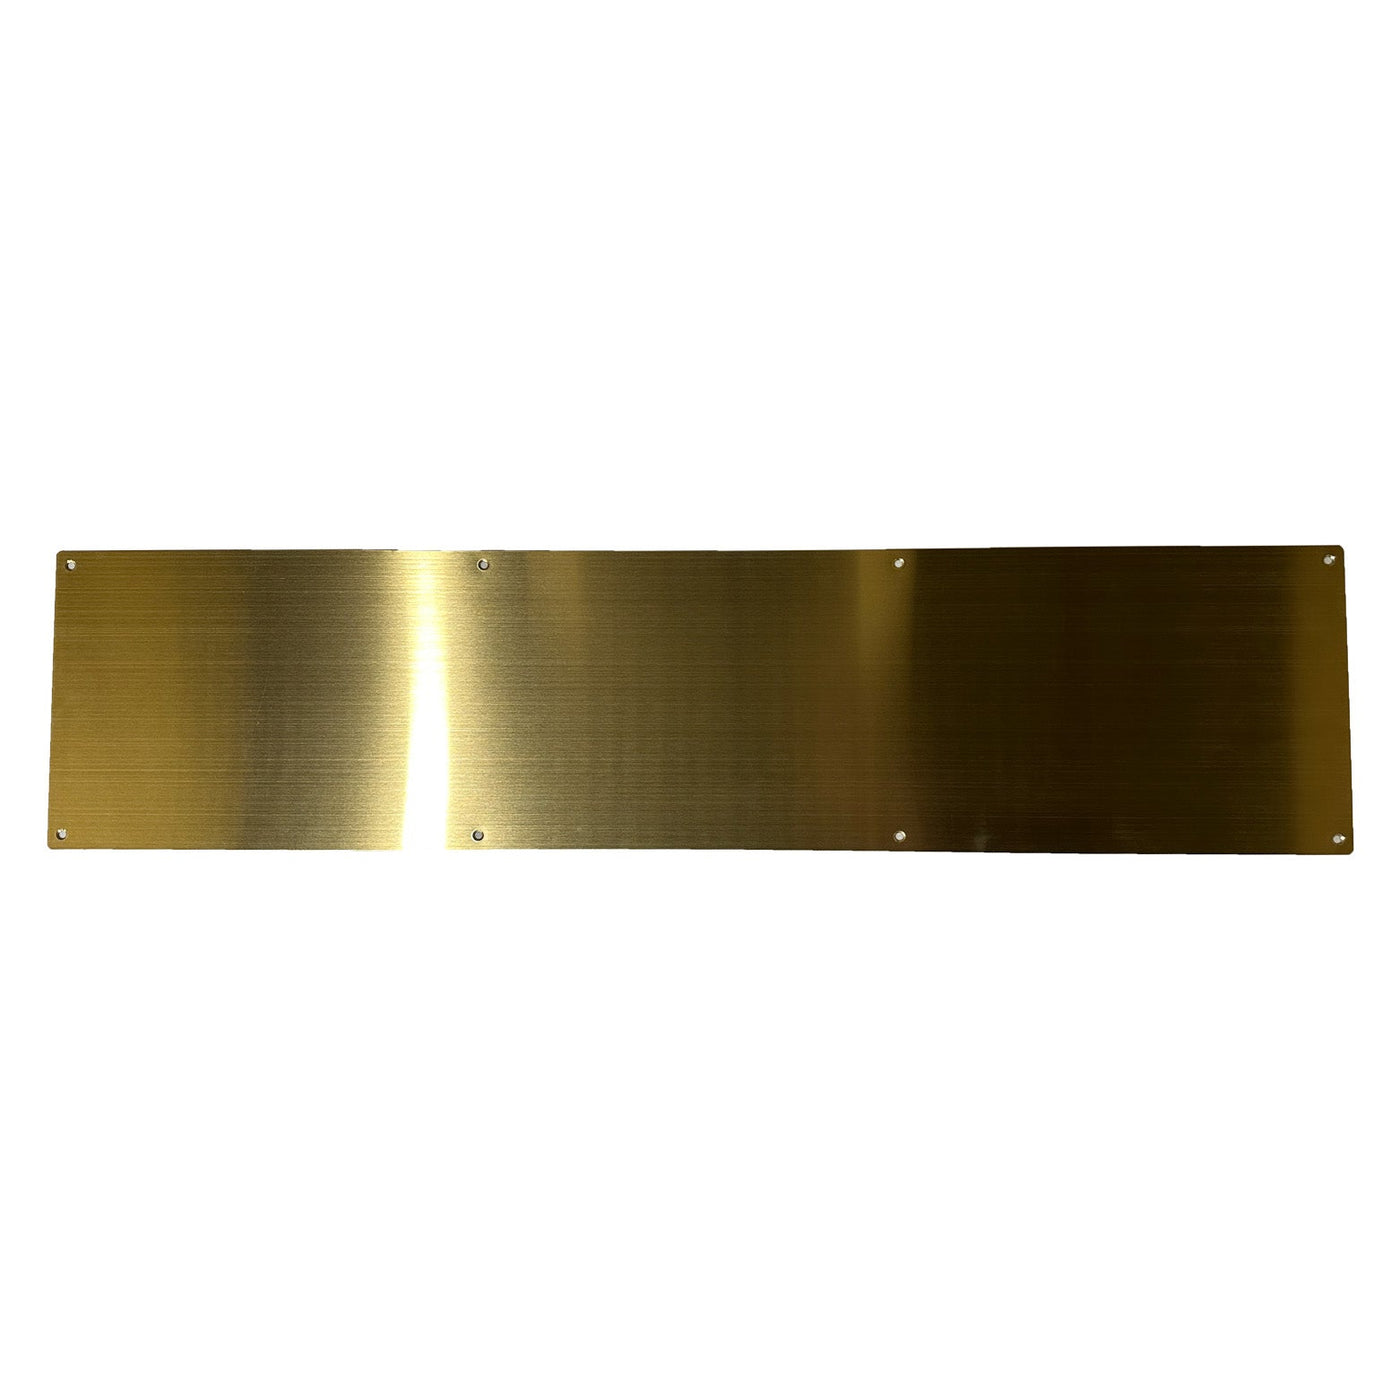 6 Inch x 34 Inch Stainless Steel Kick Plate (Polished Brass Finish)